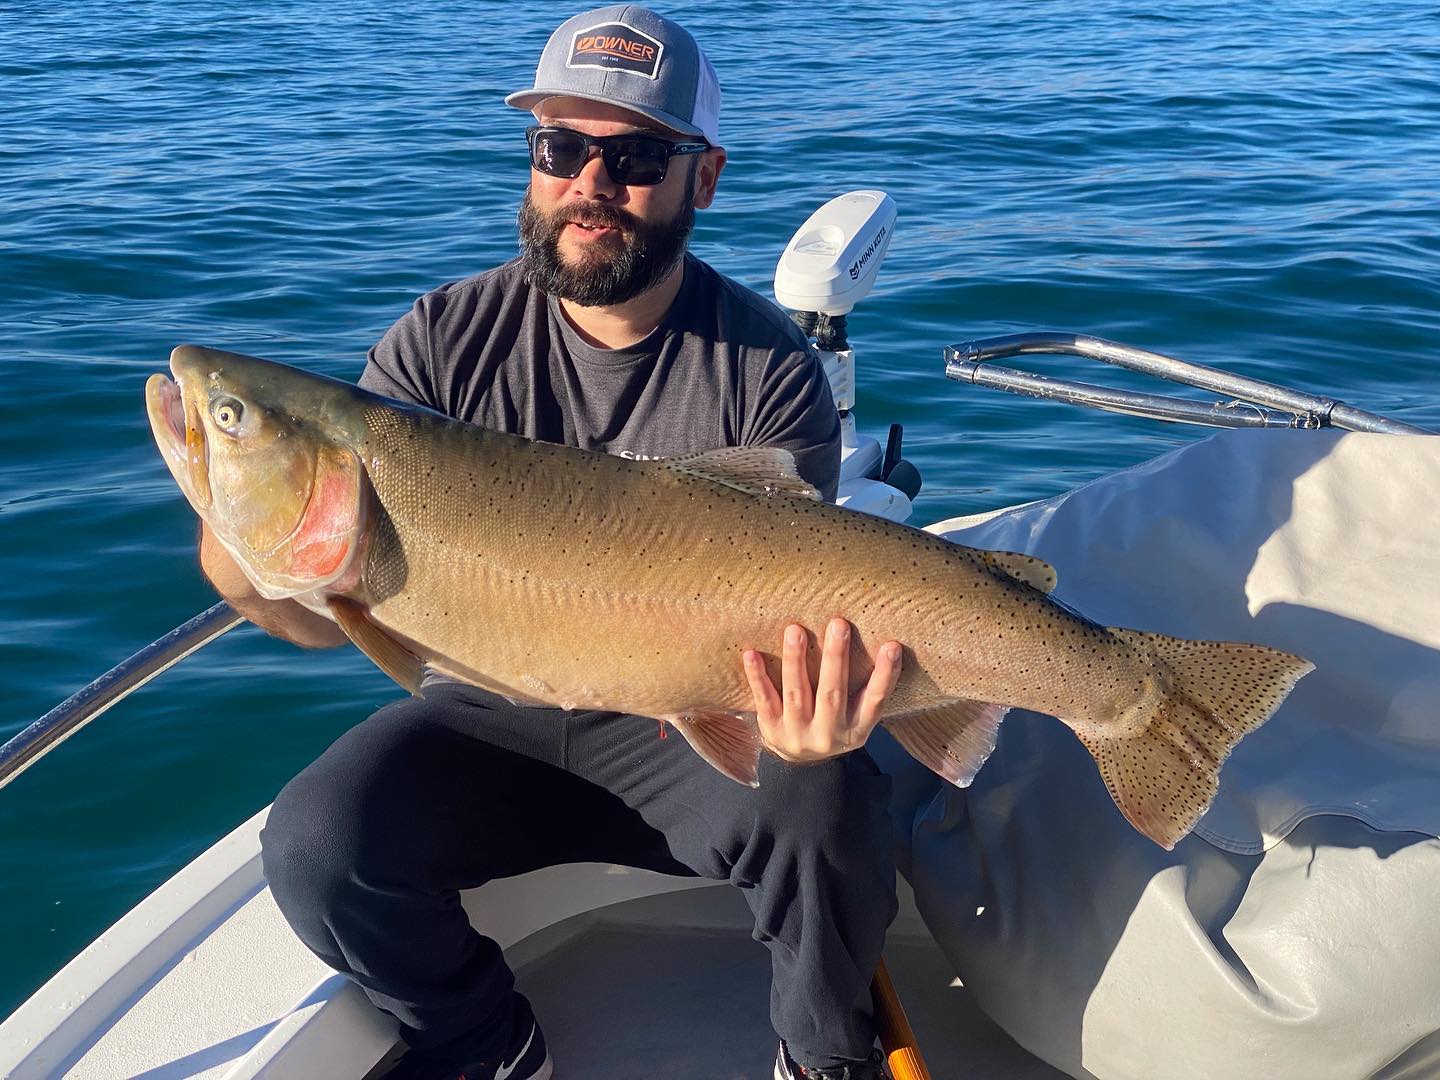 Angler catches and releases 31 lb. Lahontan cutthroat at Pyramid Lake